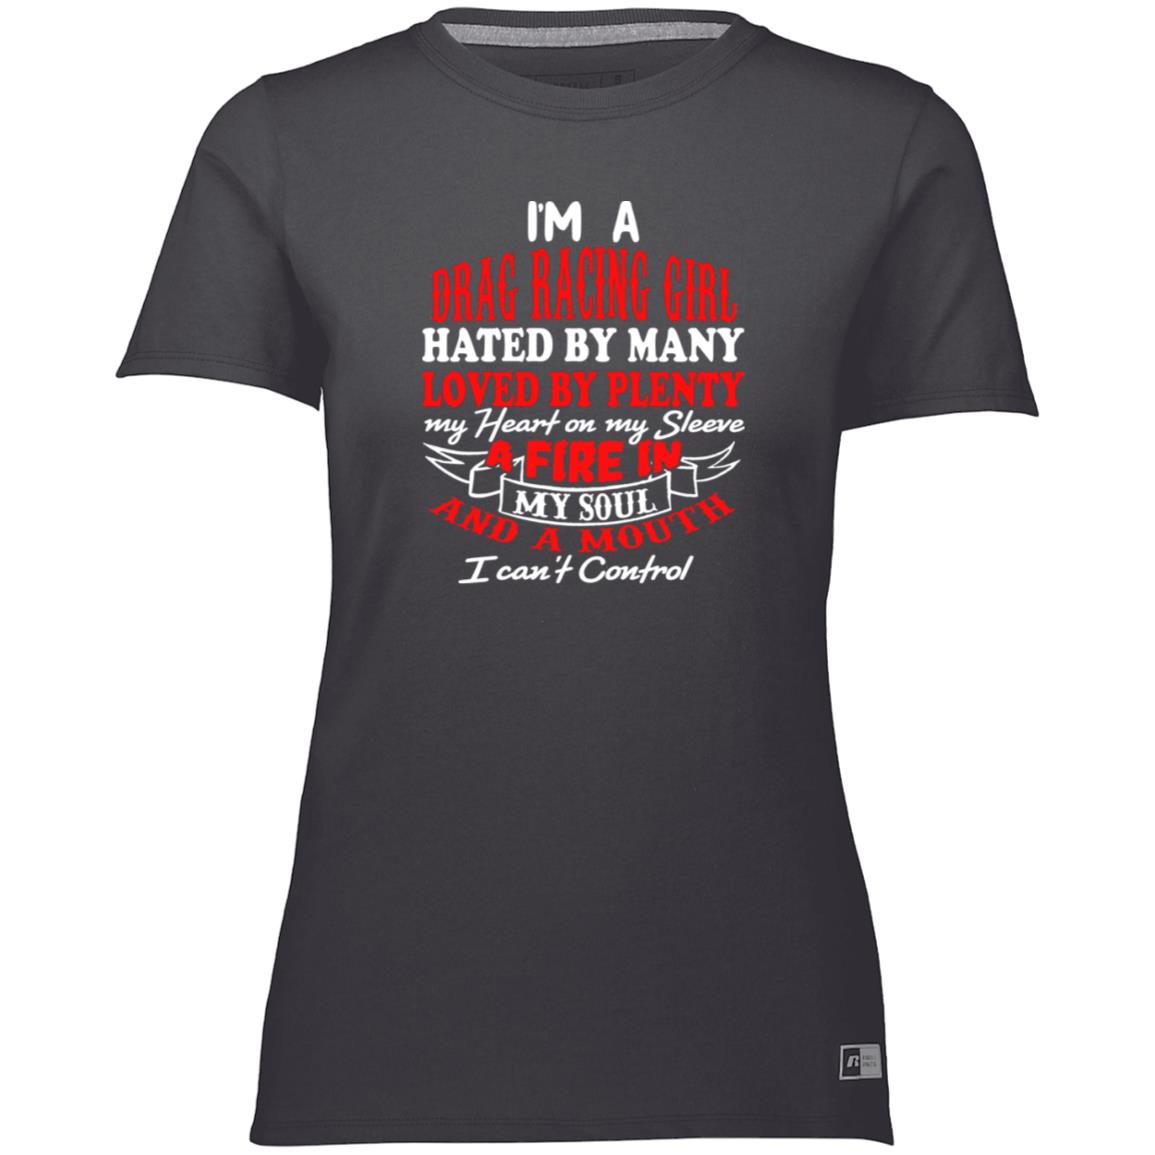 I'm A Drag Racing Girl Hated By Many Loved By Plenty Ladies’ Essential Dri-Power Tee